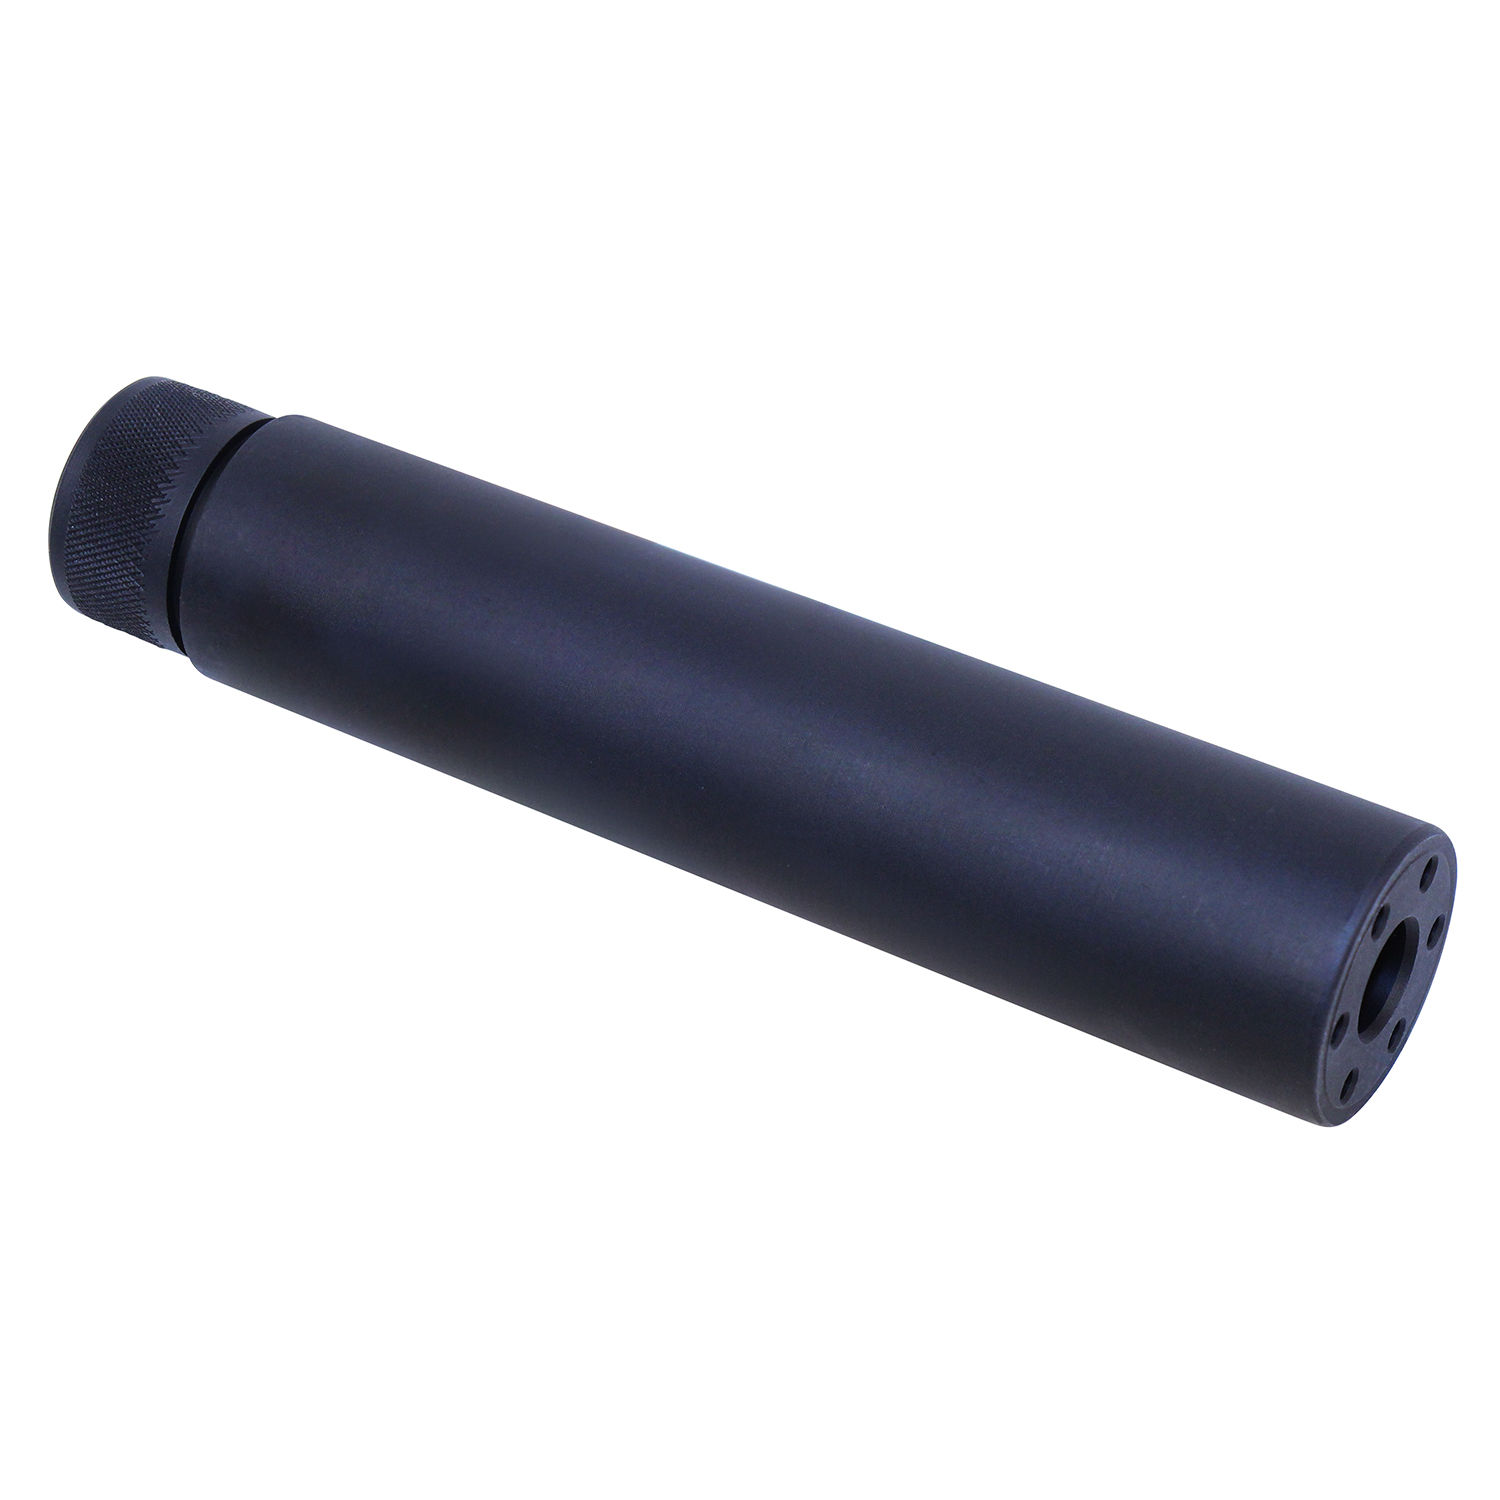 Black AR-15 6-inch fake suppressor, anodized, without engraving